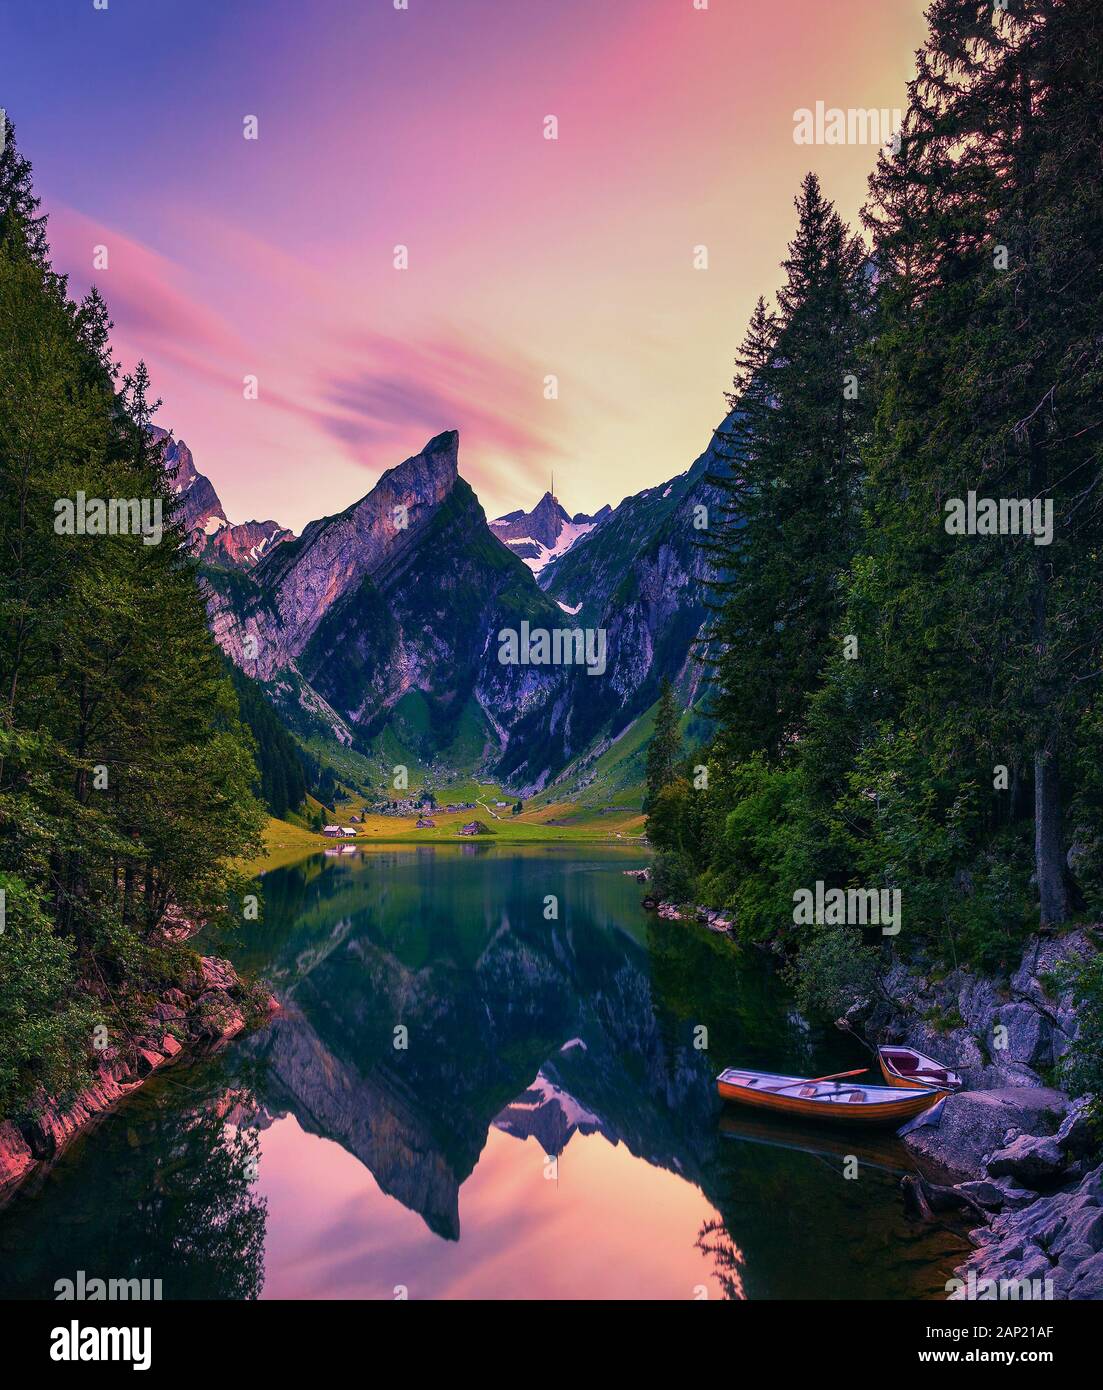 Sunset over the Seealpsee lake with small boats in the Swiss Alps, Switzerland Stock Photo